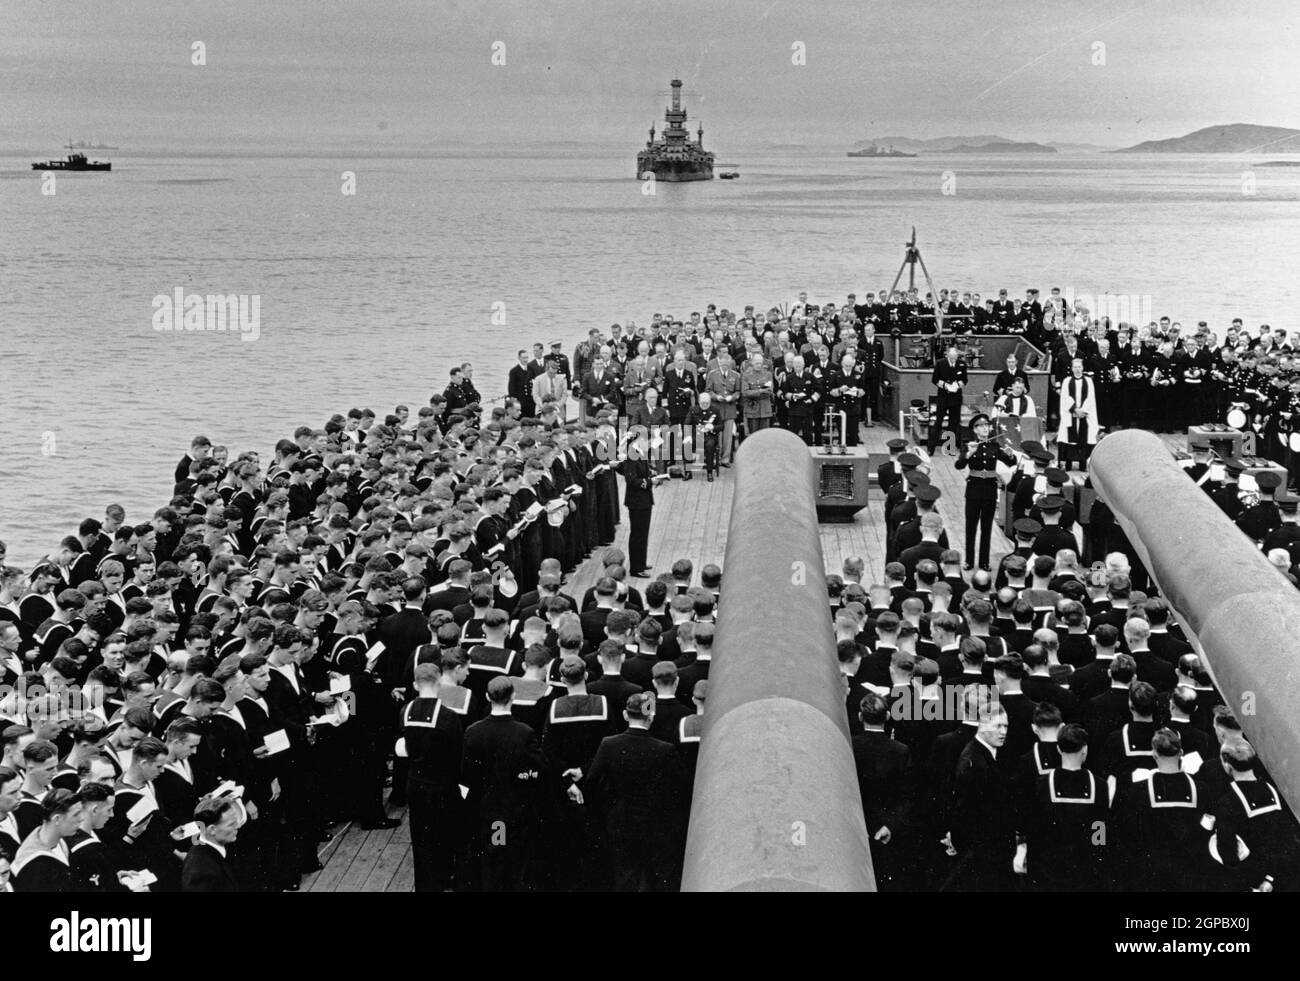 PLACENTIA BAY, NEWFOUNDLAND, CANADA - 10-12 August 1941 - Atlantic Charter Conference, 10-12 August 1941. Church service on the after deck of HMS Prin Stock Photo